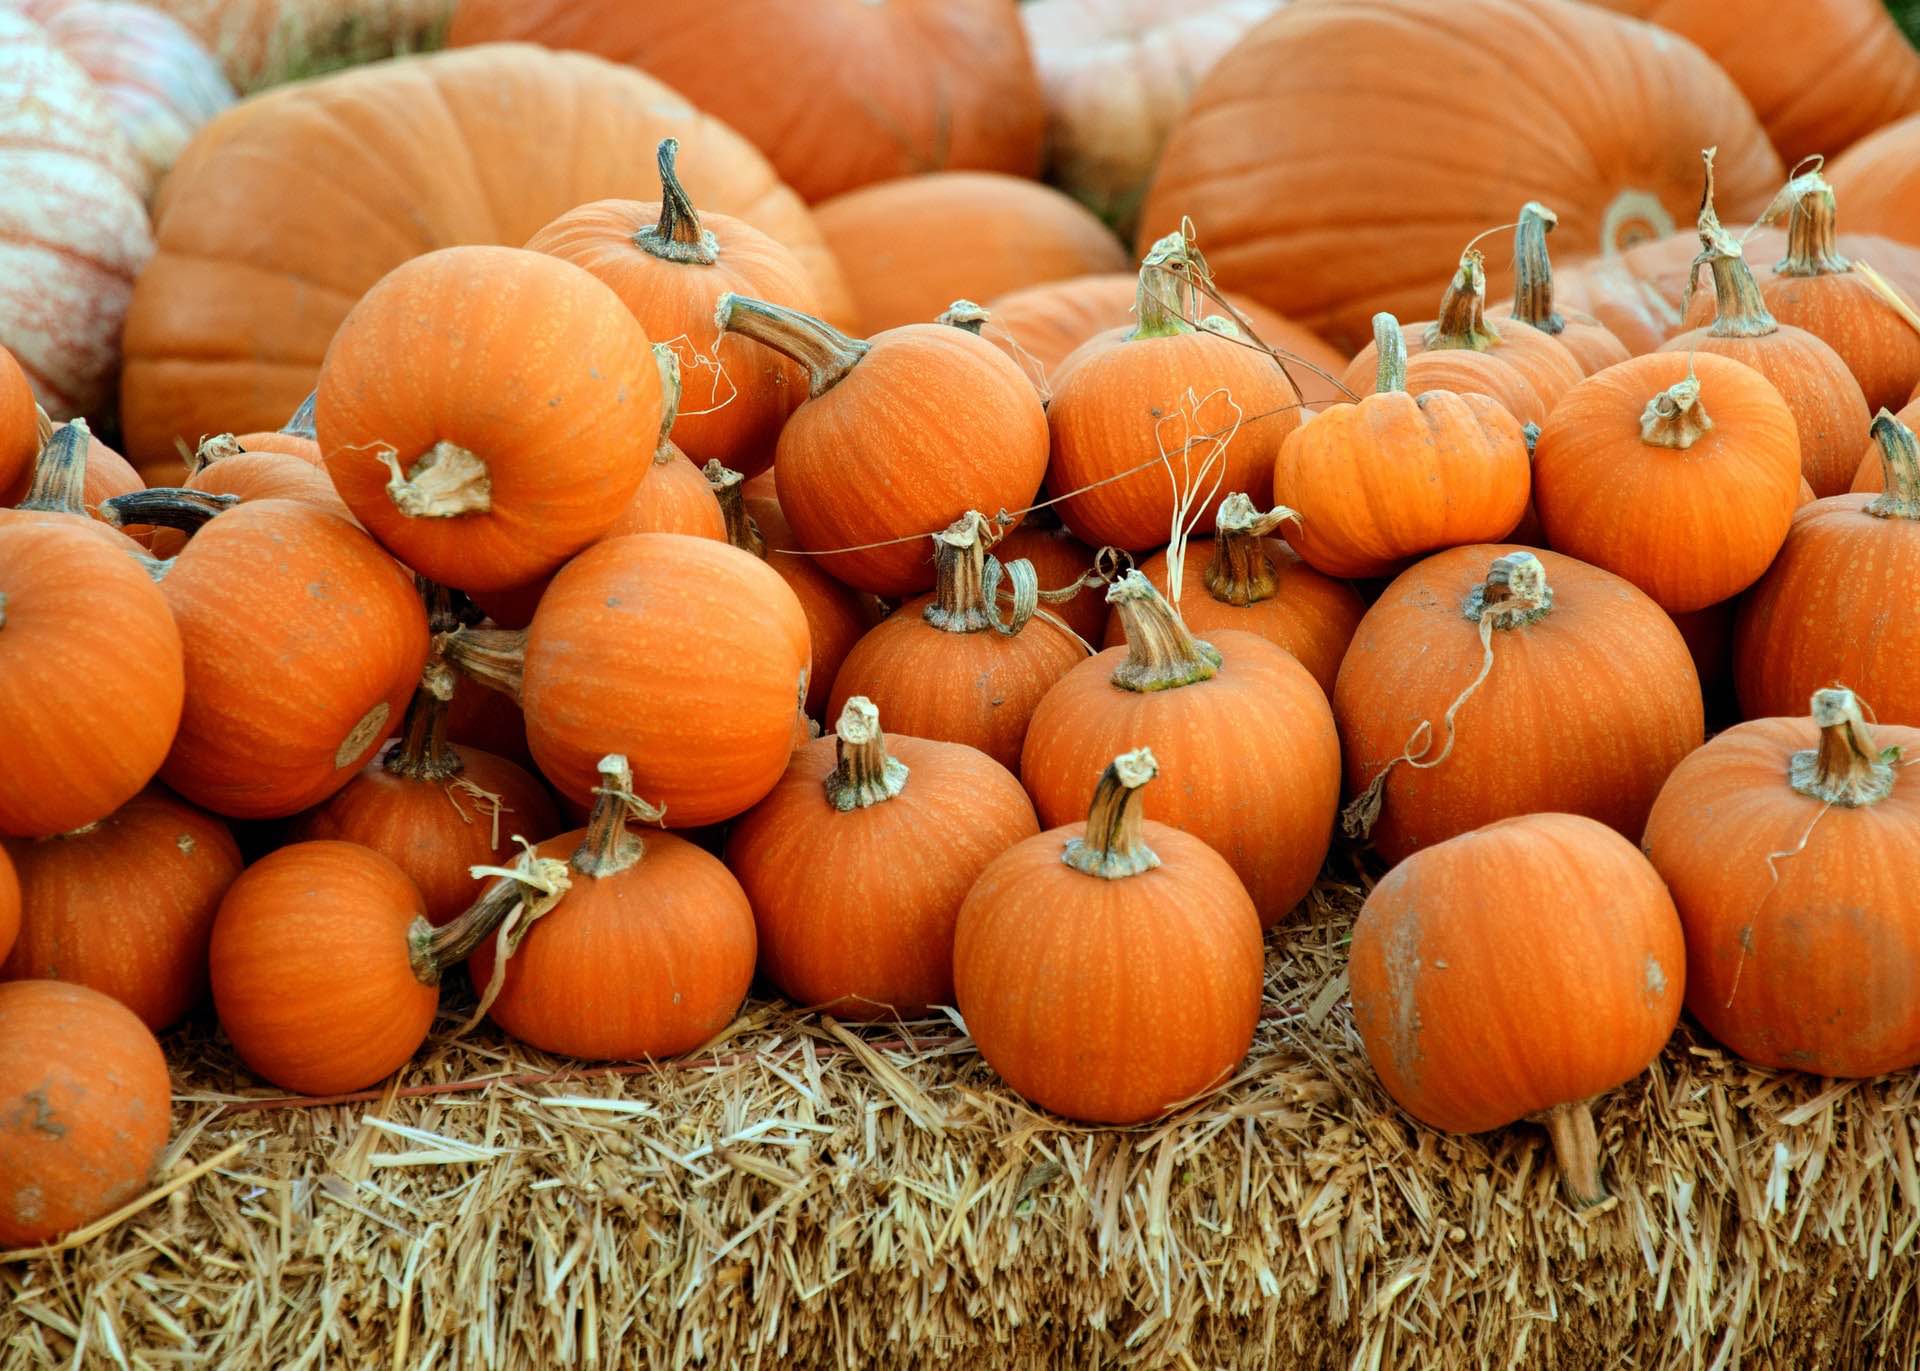 The Best Ways to Decorate a Pumpkin, No Carving Knife Necessary